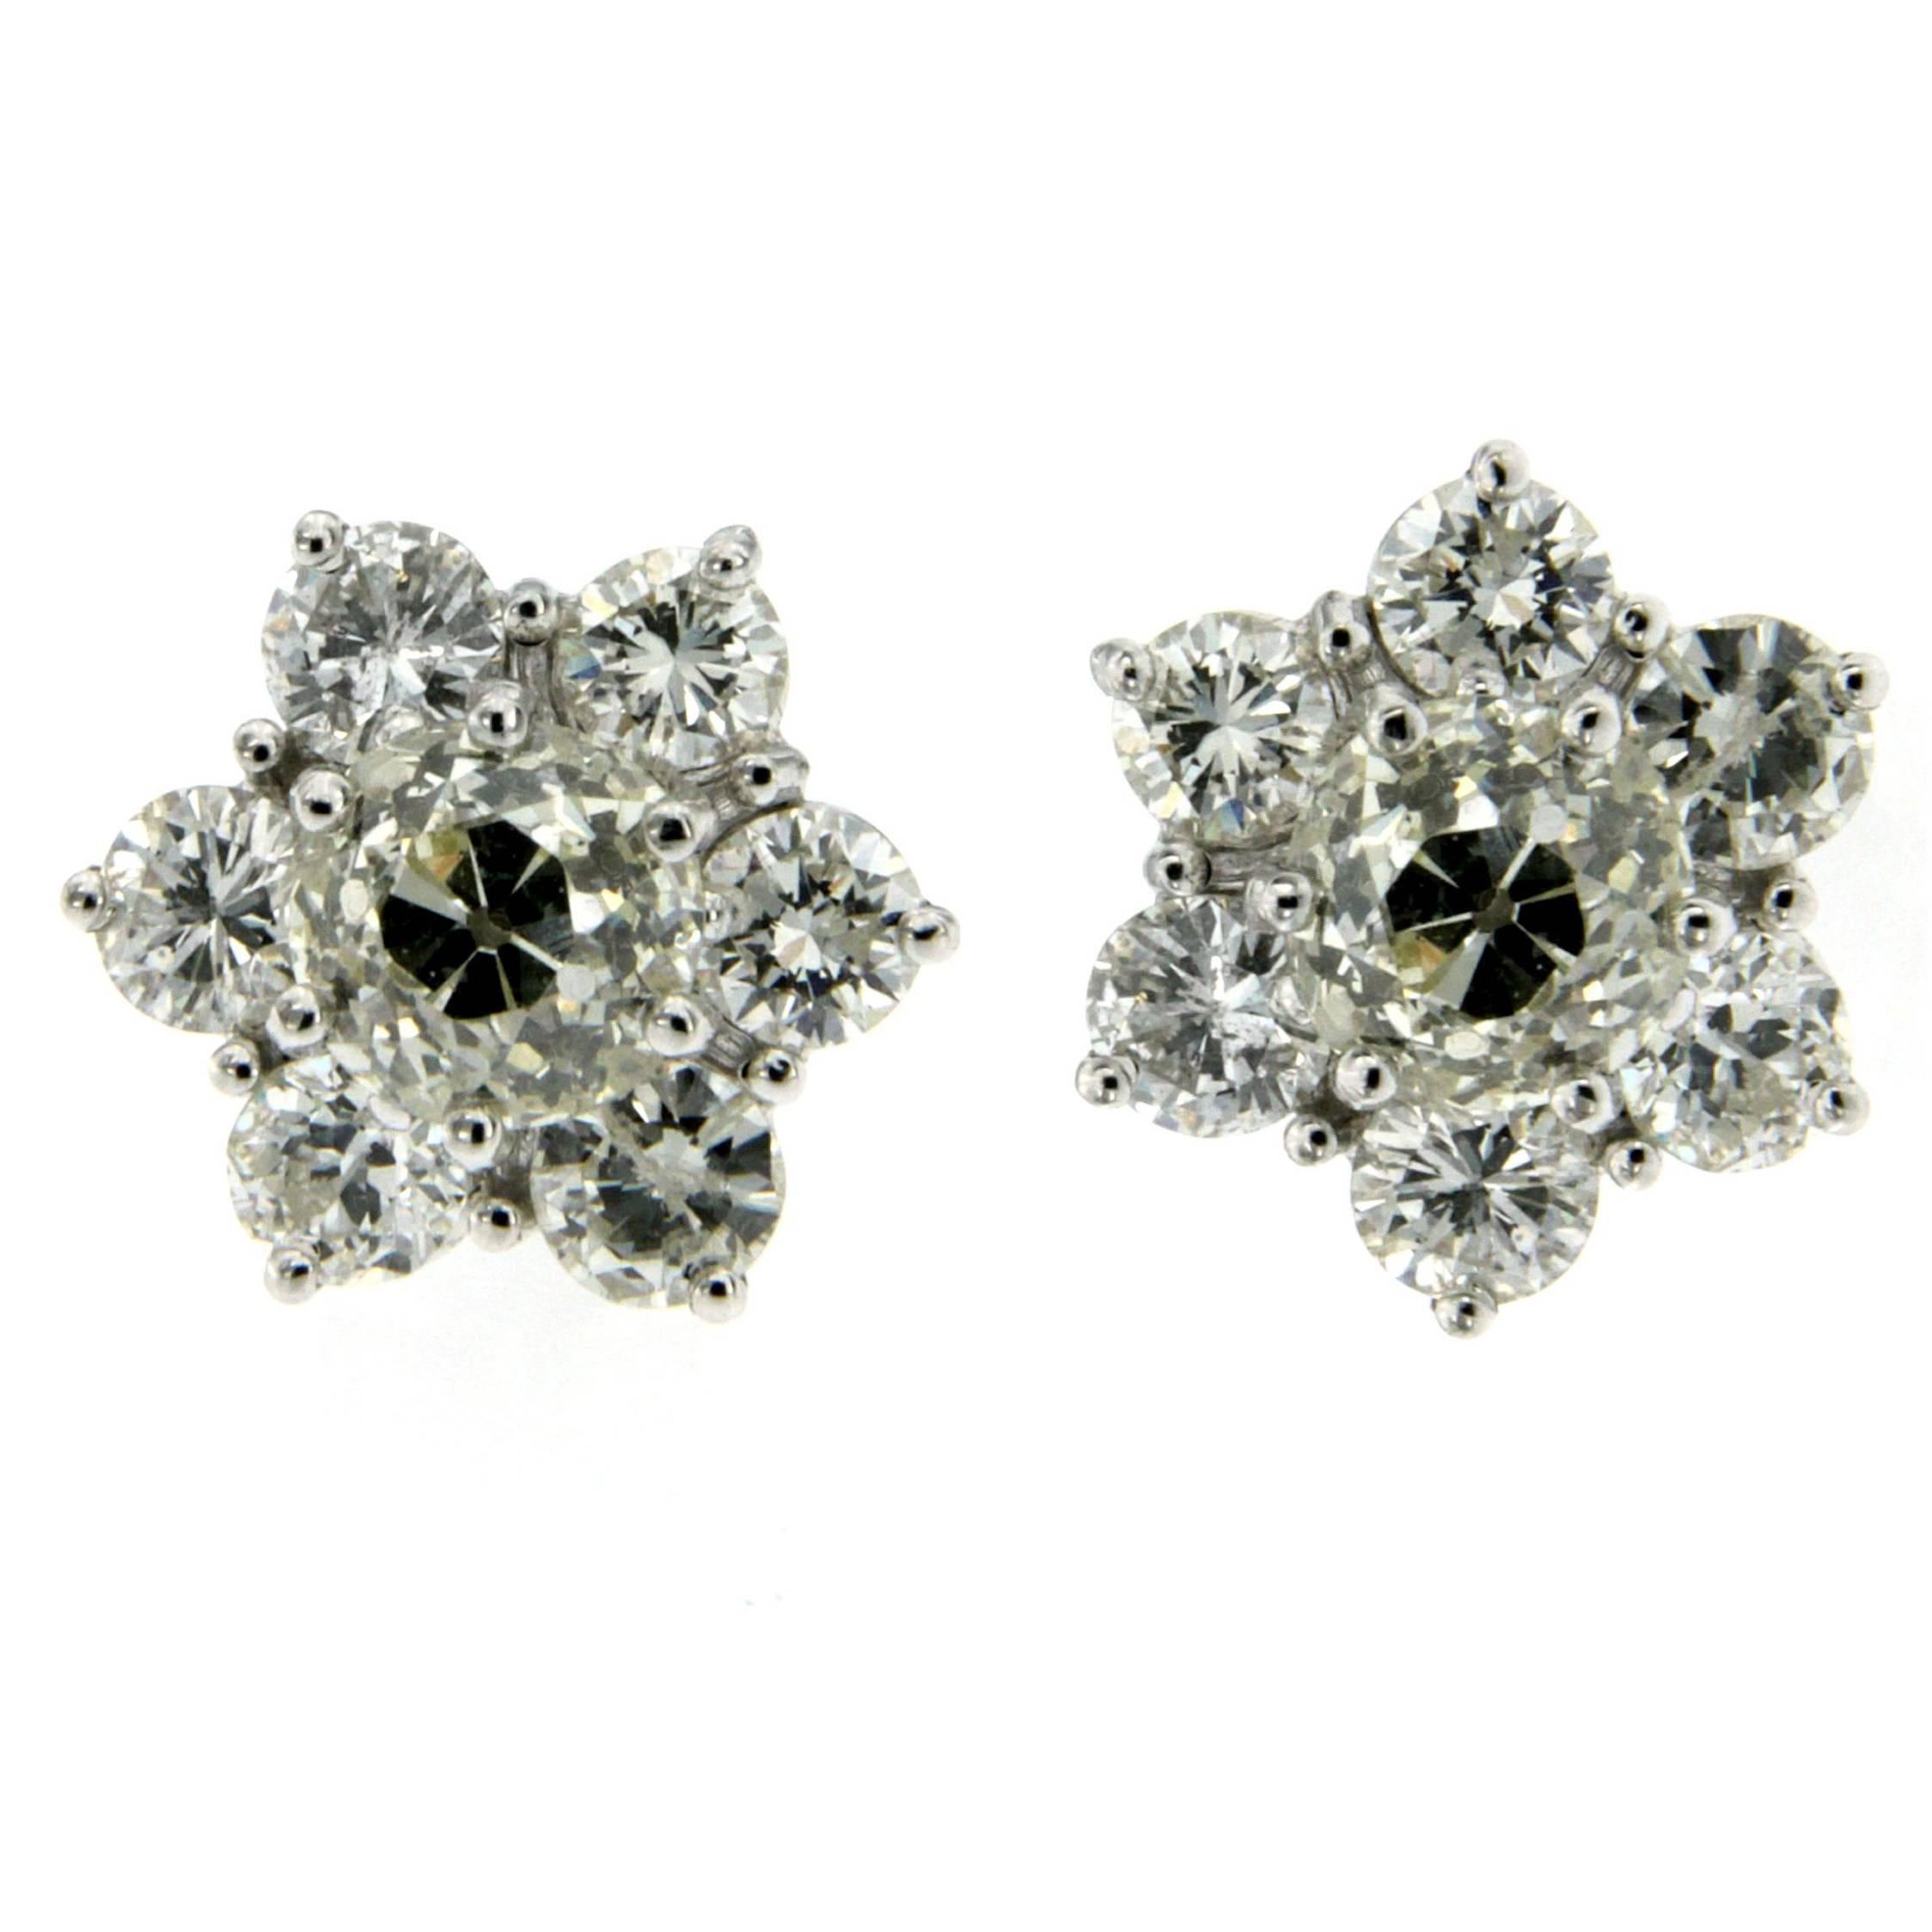 1930s 3.76 Carats Old Mine Cut Diamonds Gold Cluster Earrings